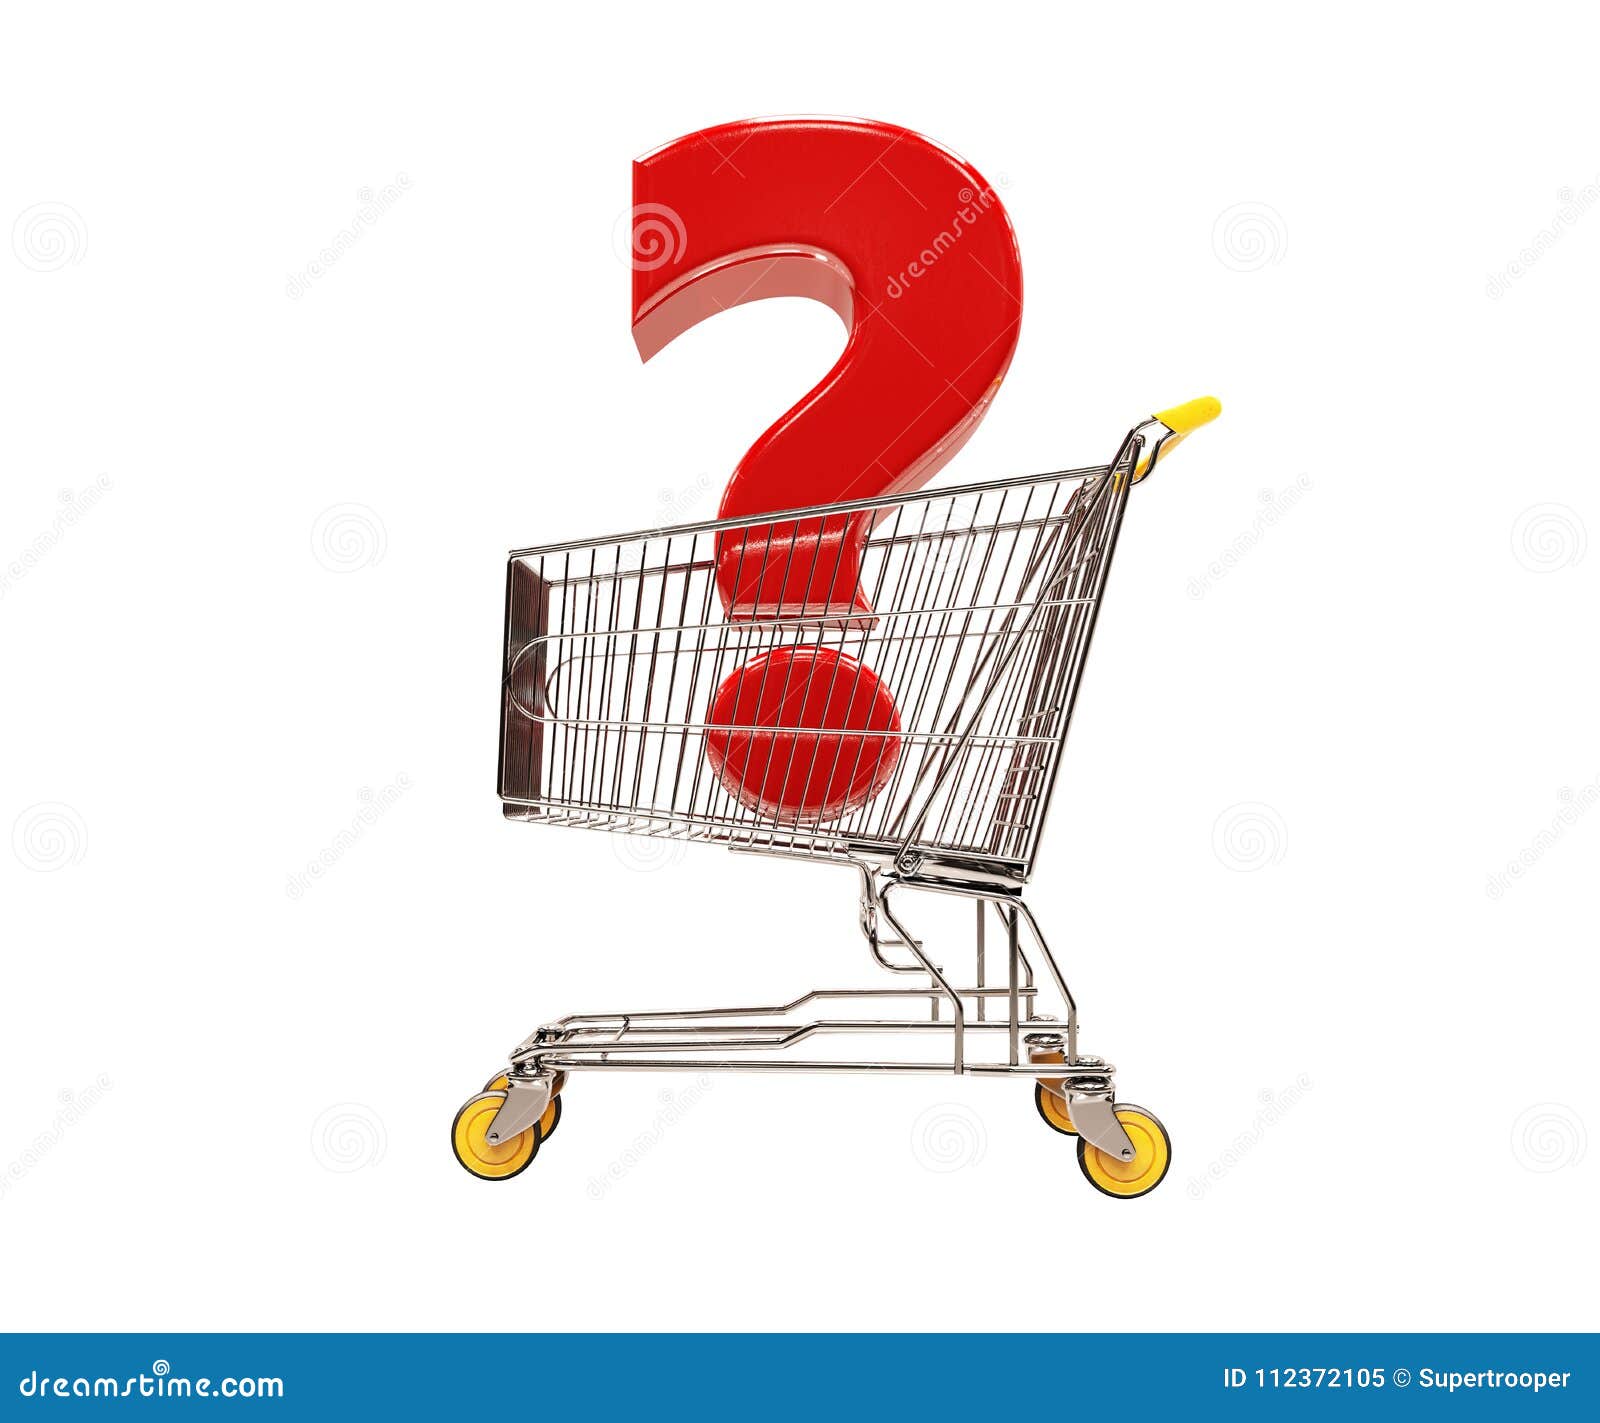 Shopping Cart Help And Information 